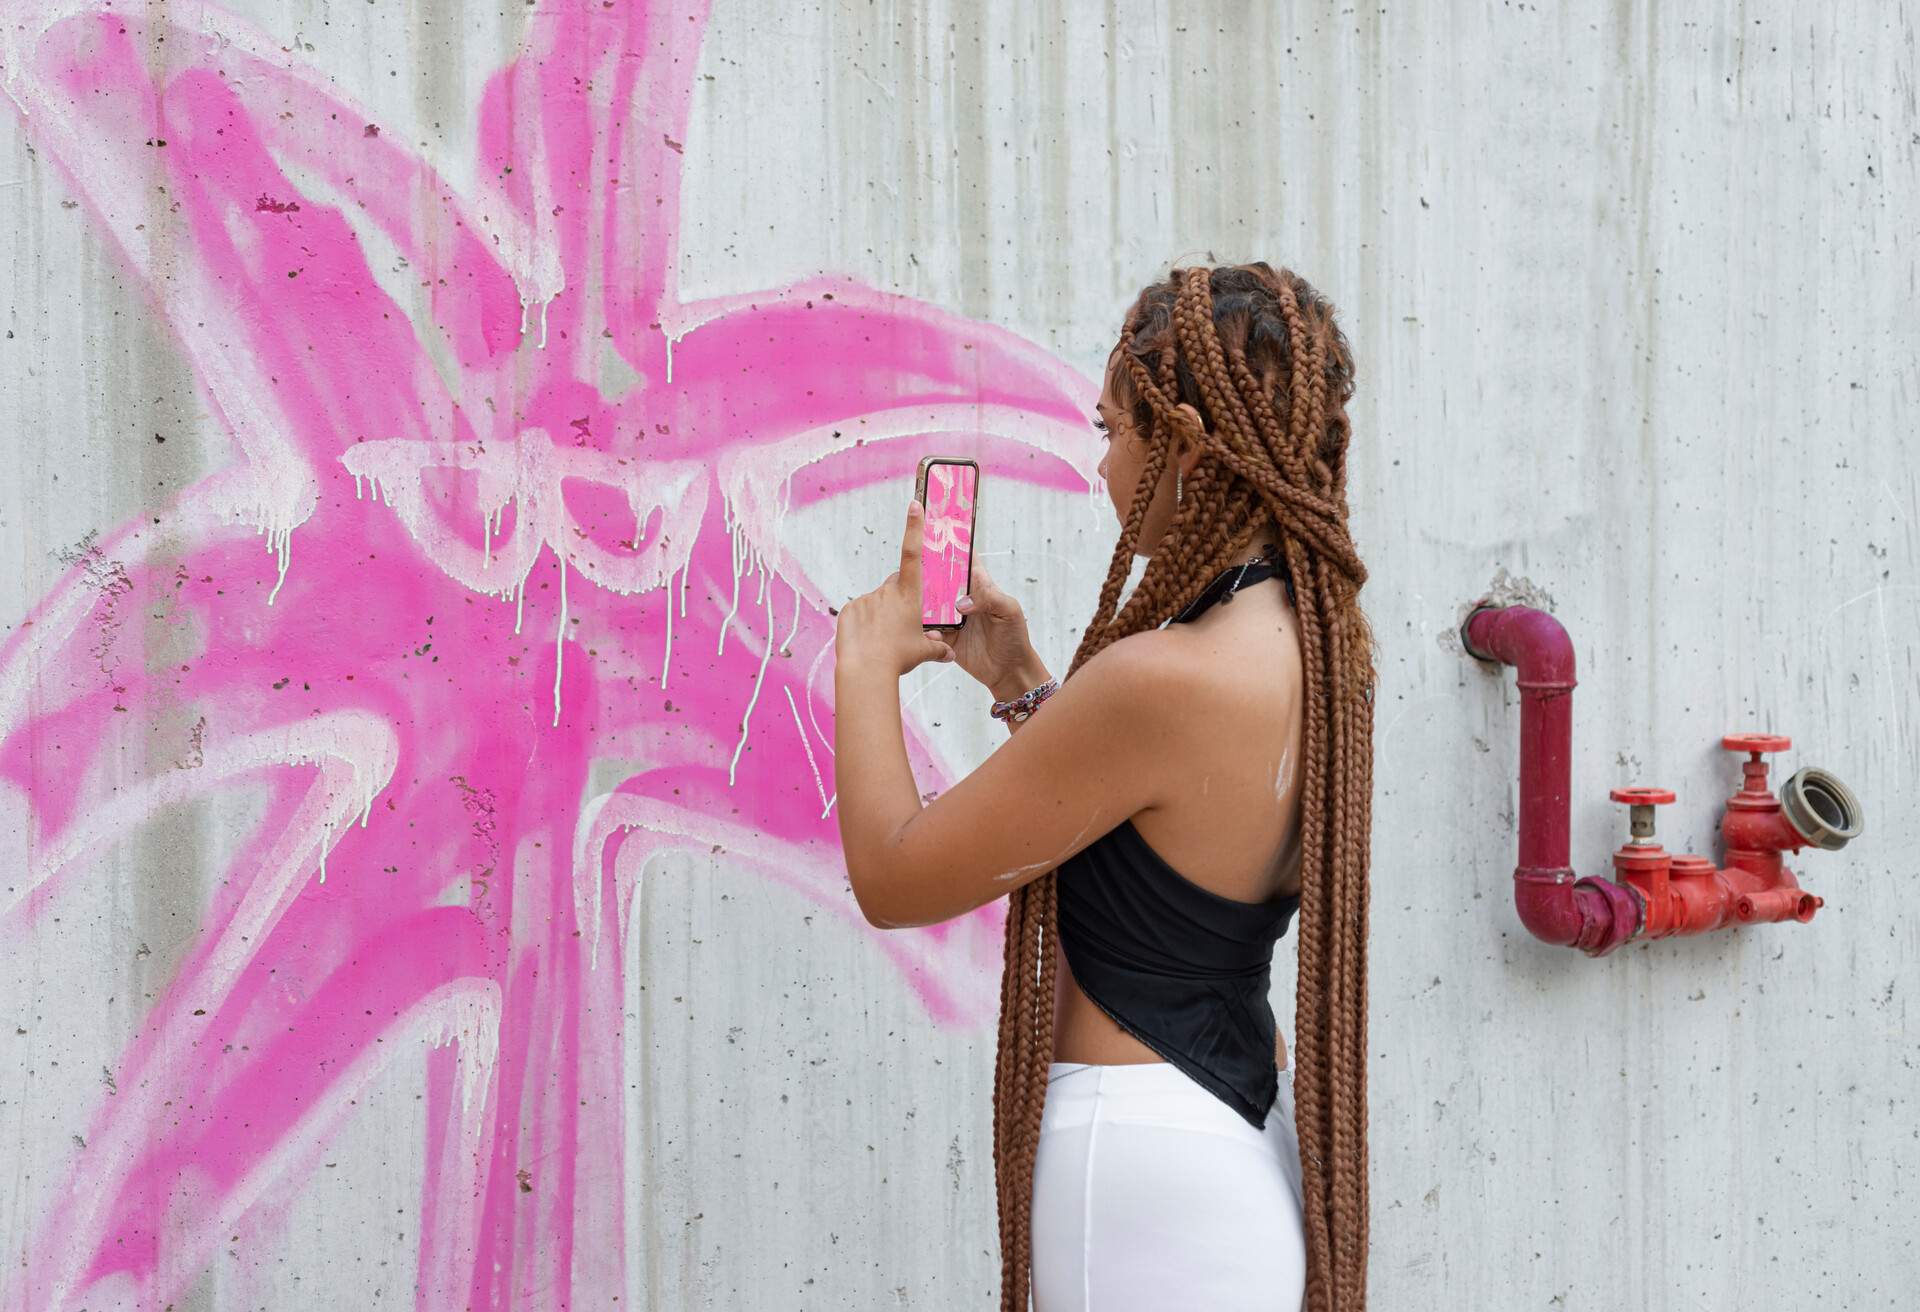 Mixed race young woman with braided hair taking a photo with mobile phone of the mural she is painting